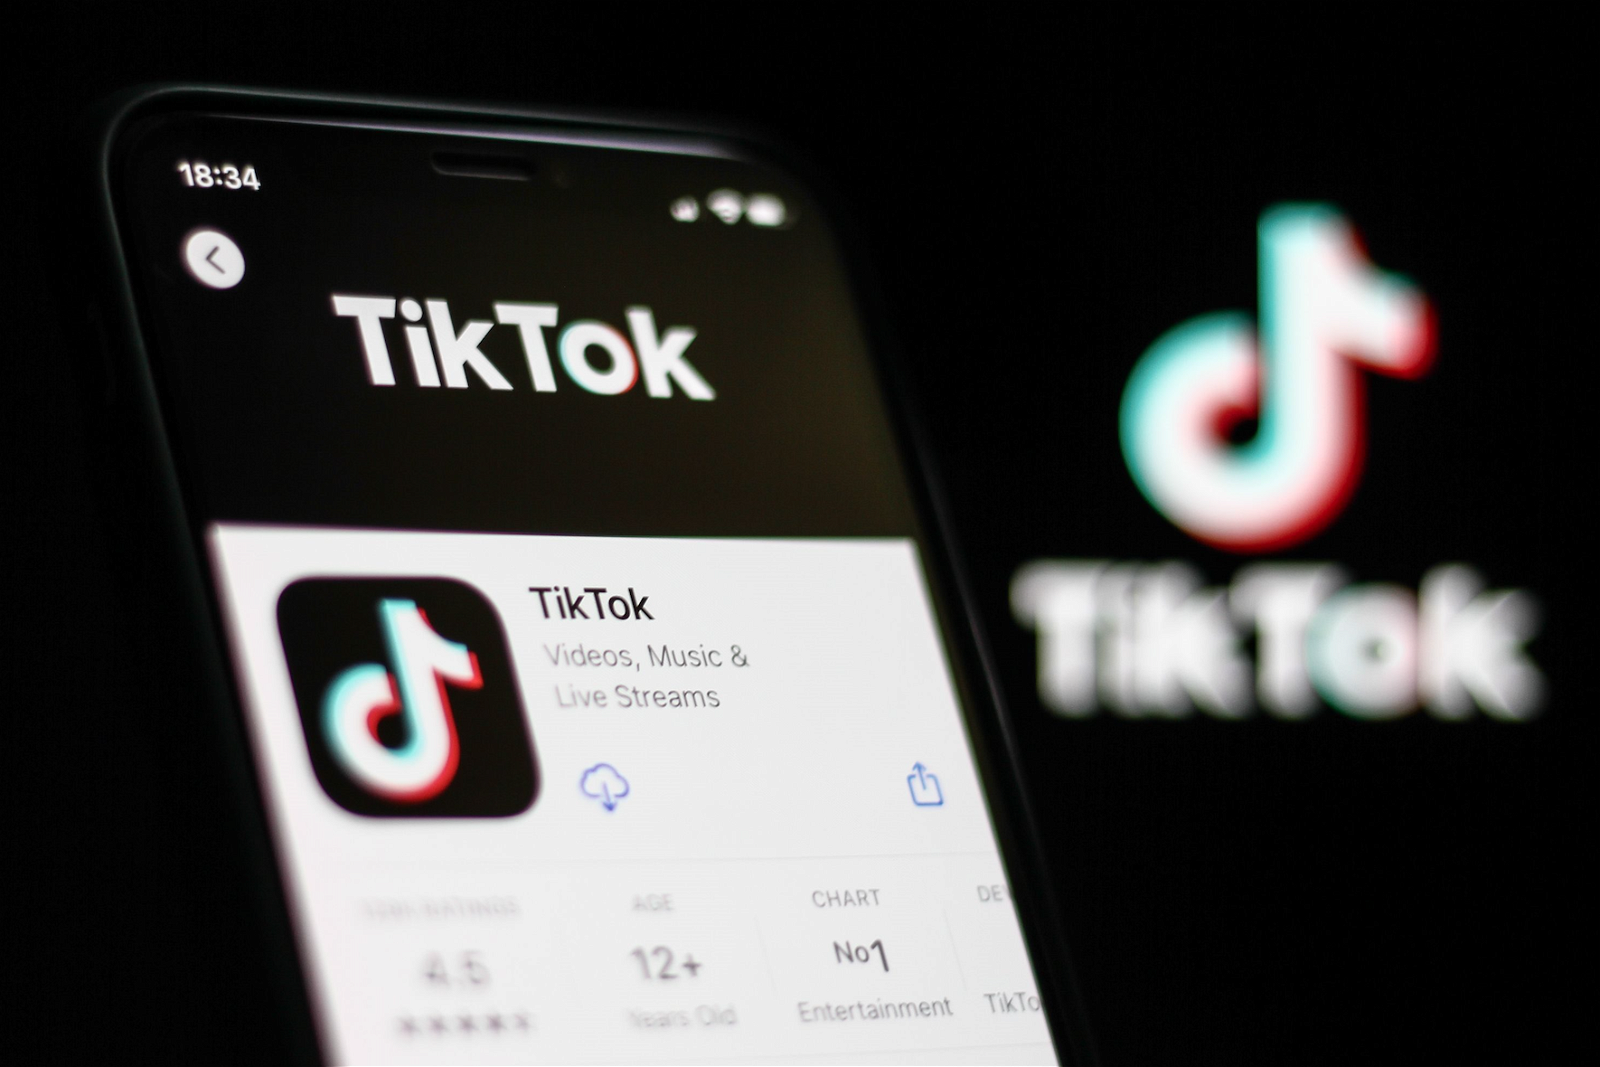 how to download tiktok videos on computer